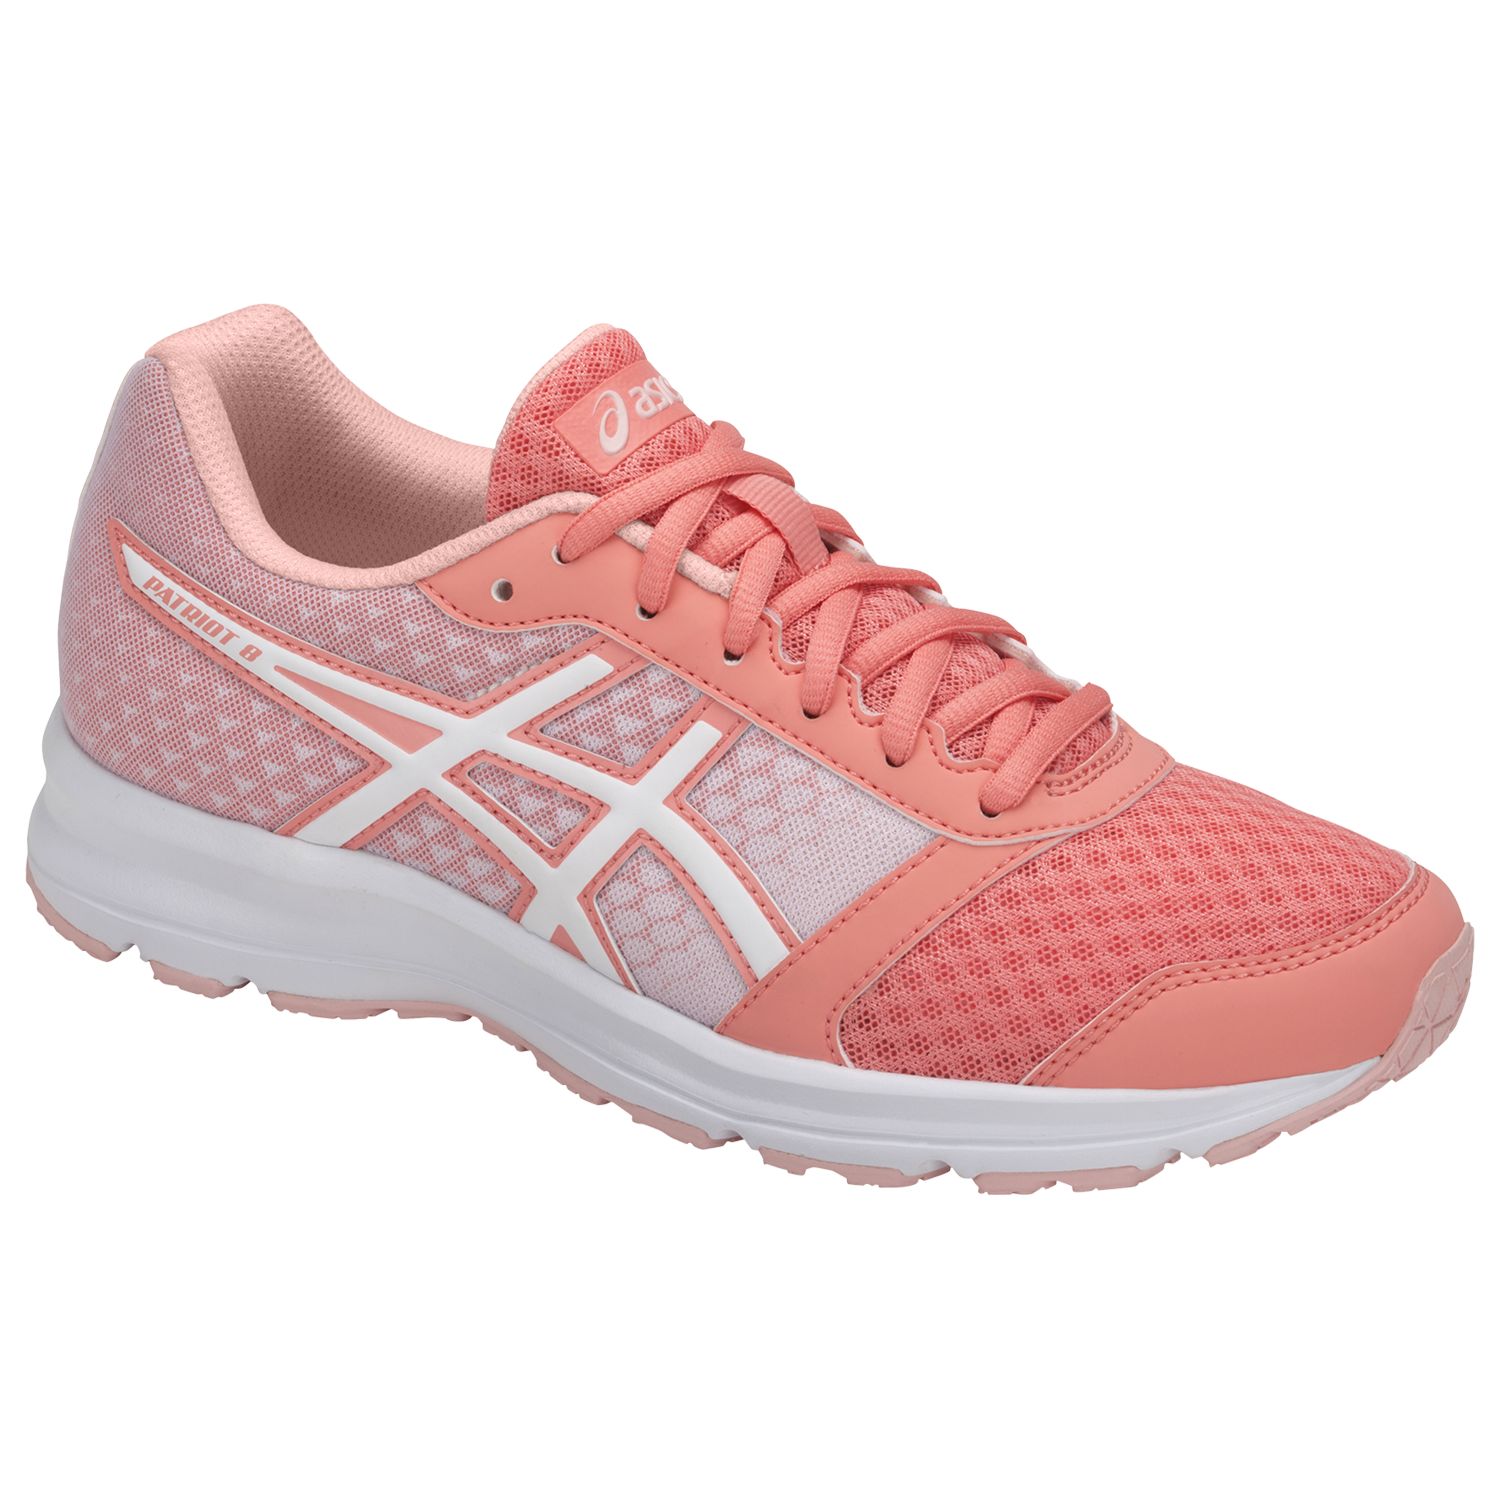 asics patriot 9 running shoes ladies review